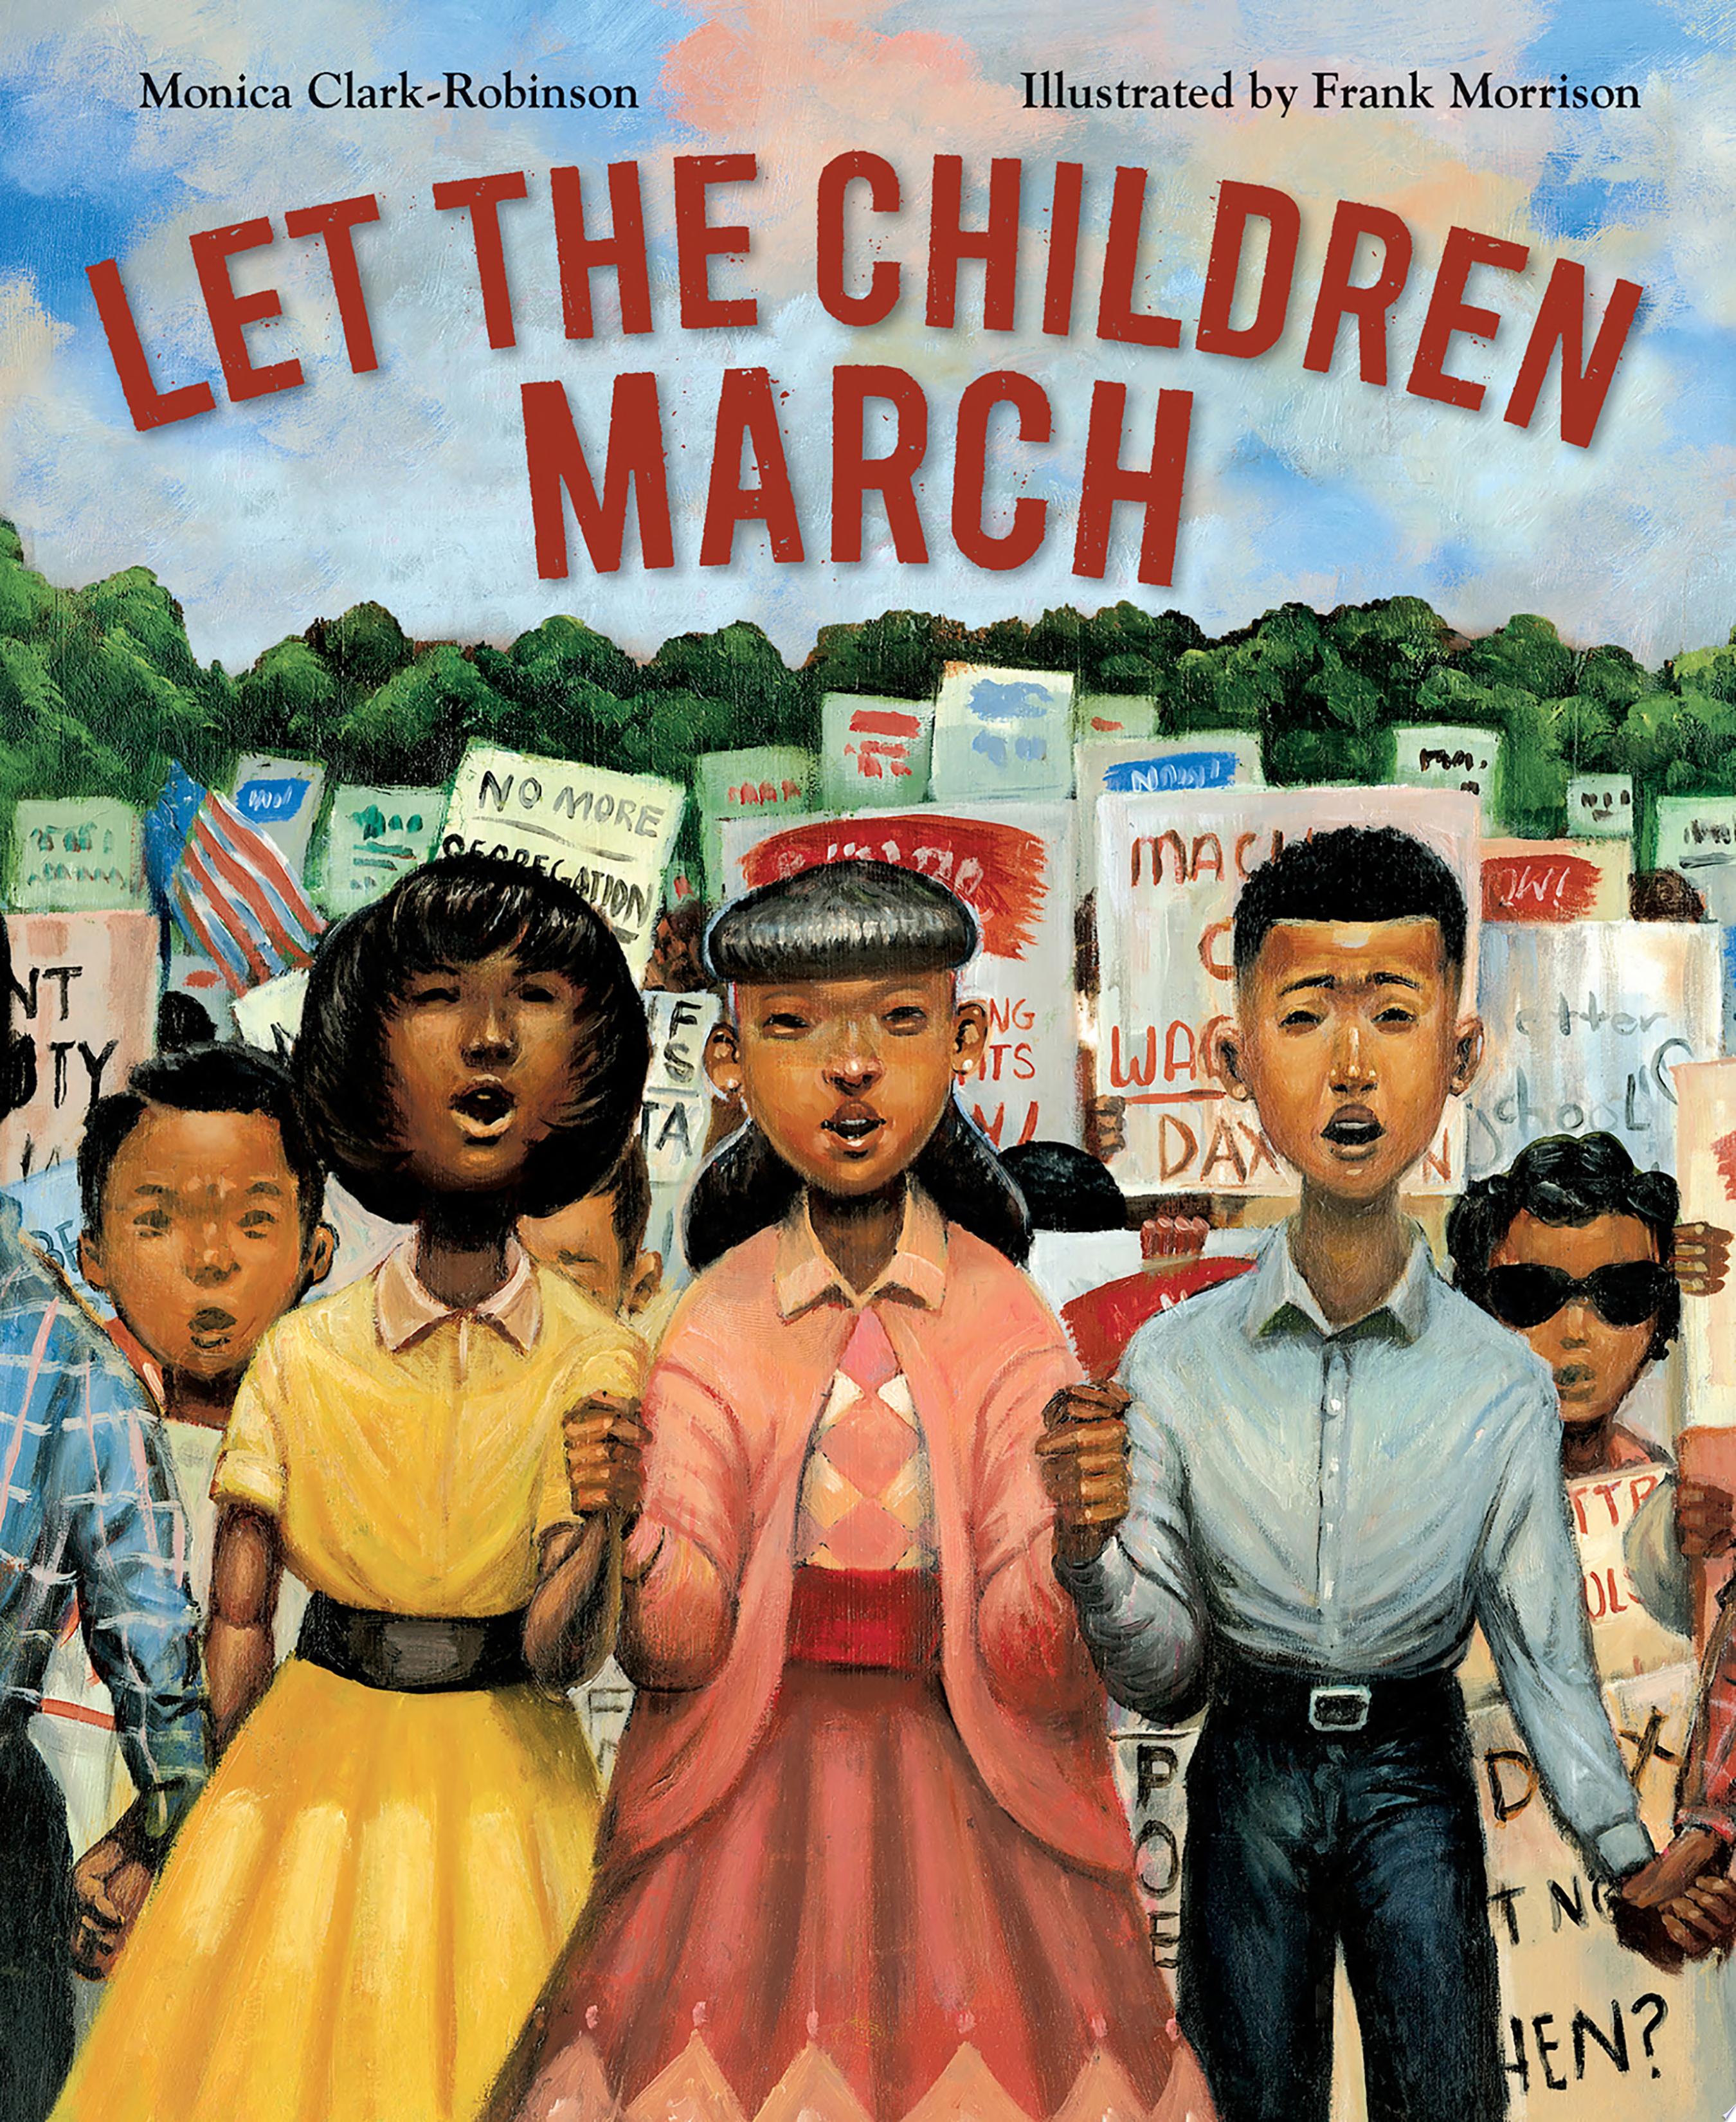 Image for "Let the Children March" - an illustration of Black children standing at the front of a protest.